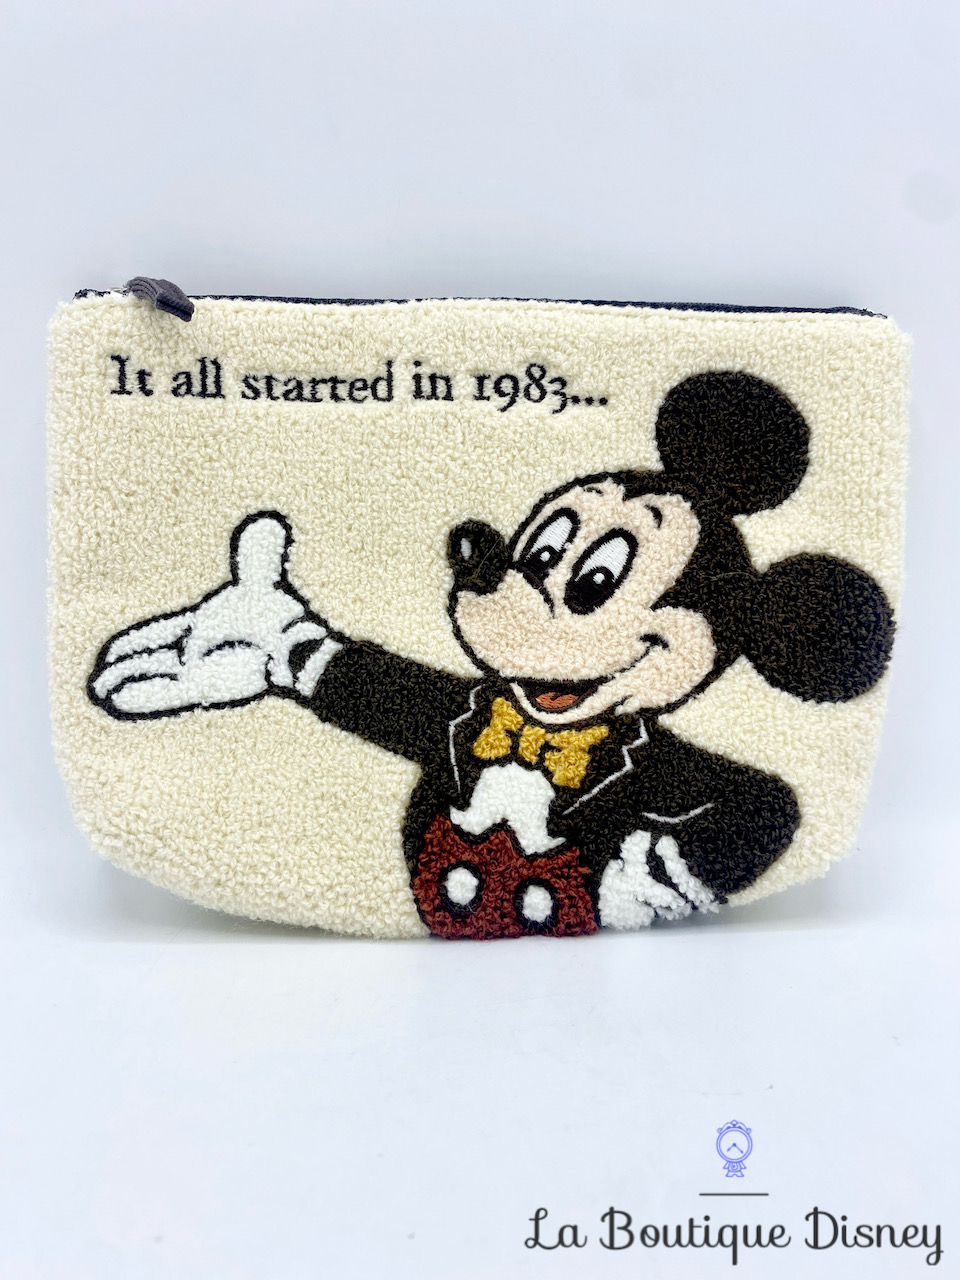 pochette-mickey-mouse-it-all-started-in-1983-tokyo-resort-35-years-trousse-maquillage-japon-3